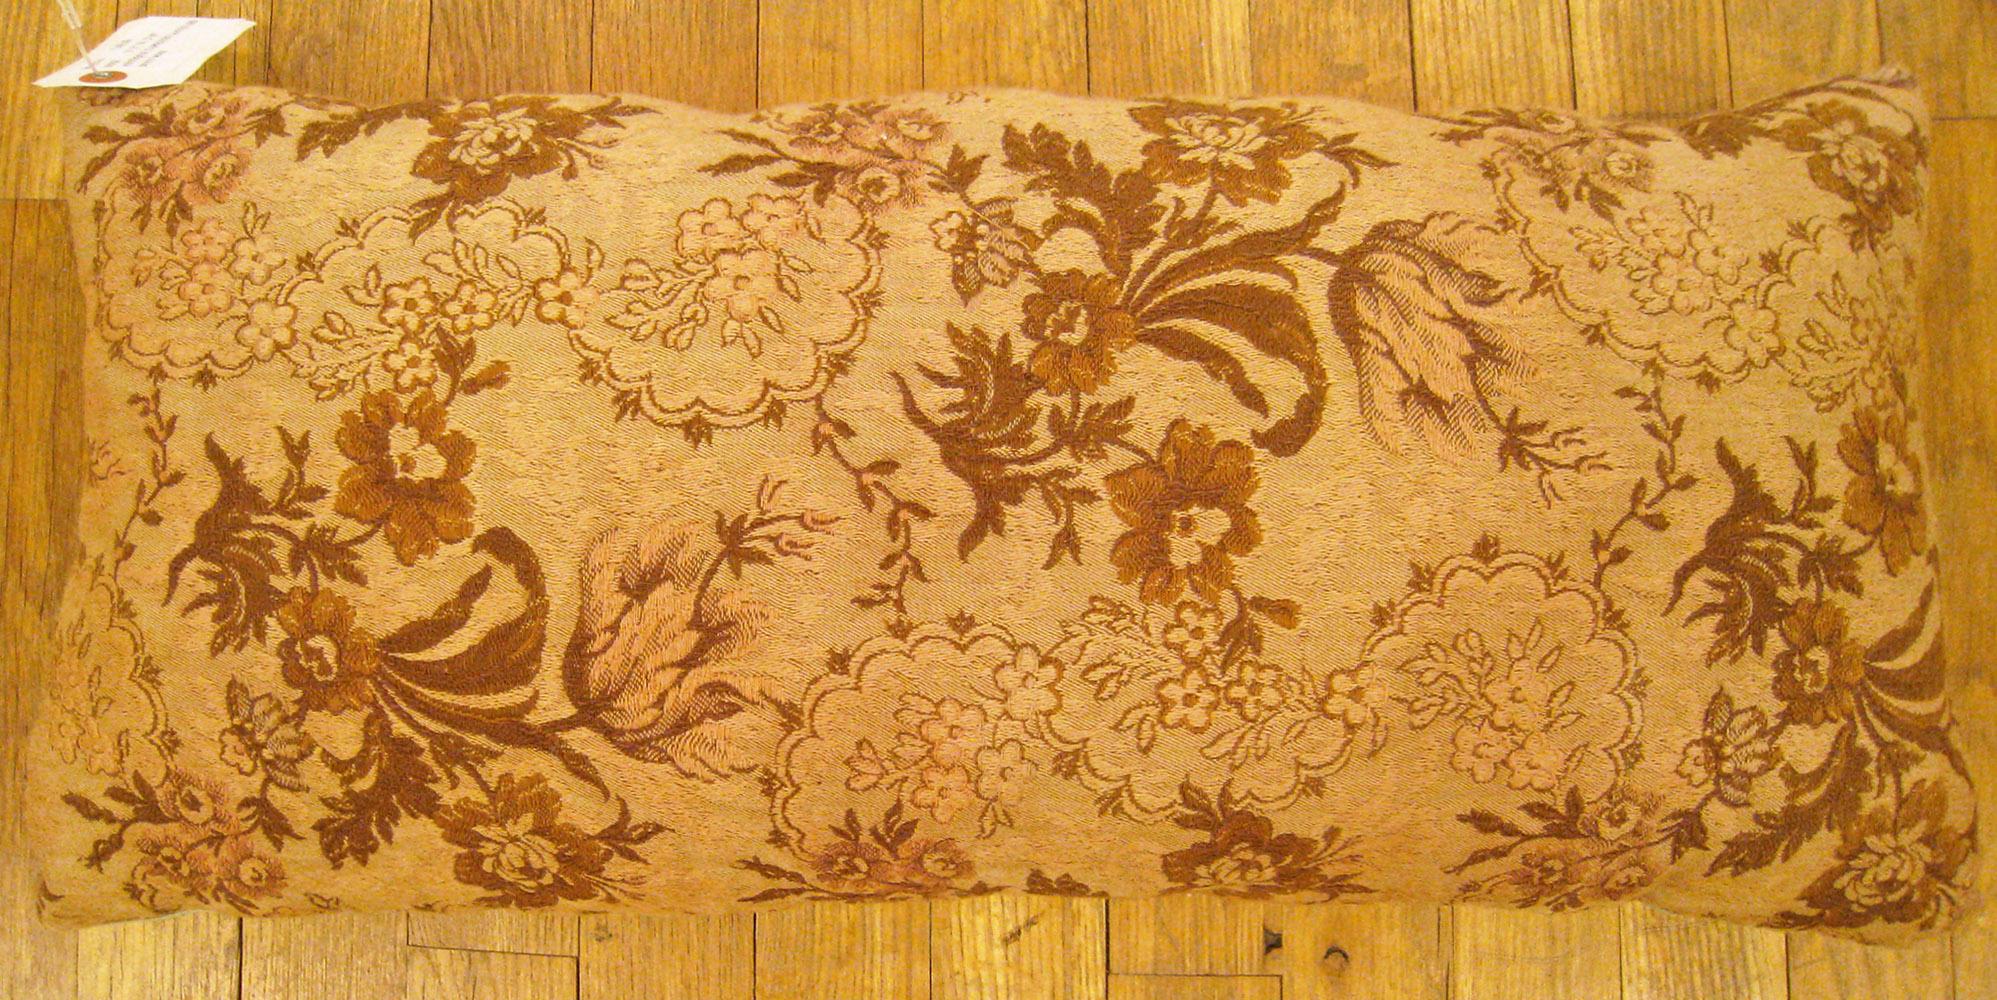 Antique Jacquard Tapestry Pillow; size 1'1” x 2'0”. 

An antique decorative pillow with floral elements allover a light brown central field, size 1'1